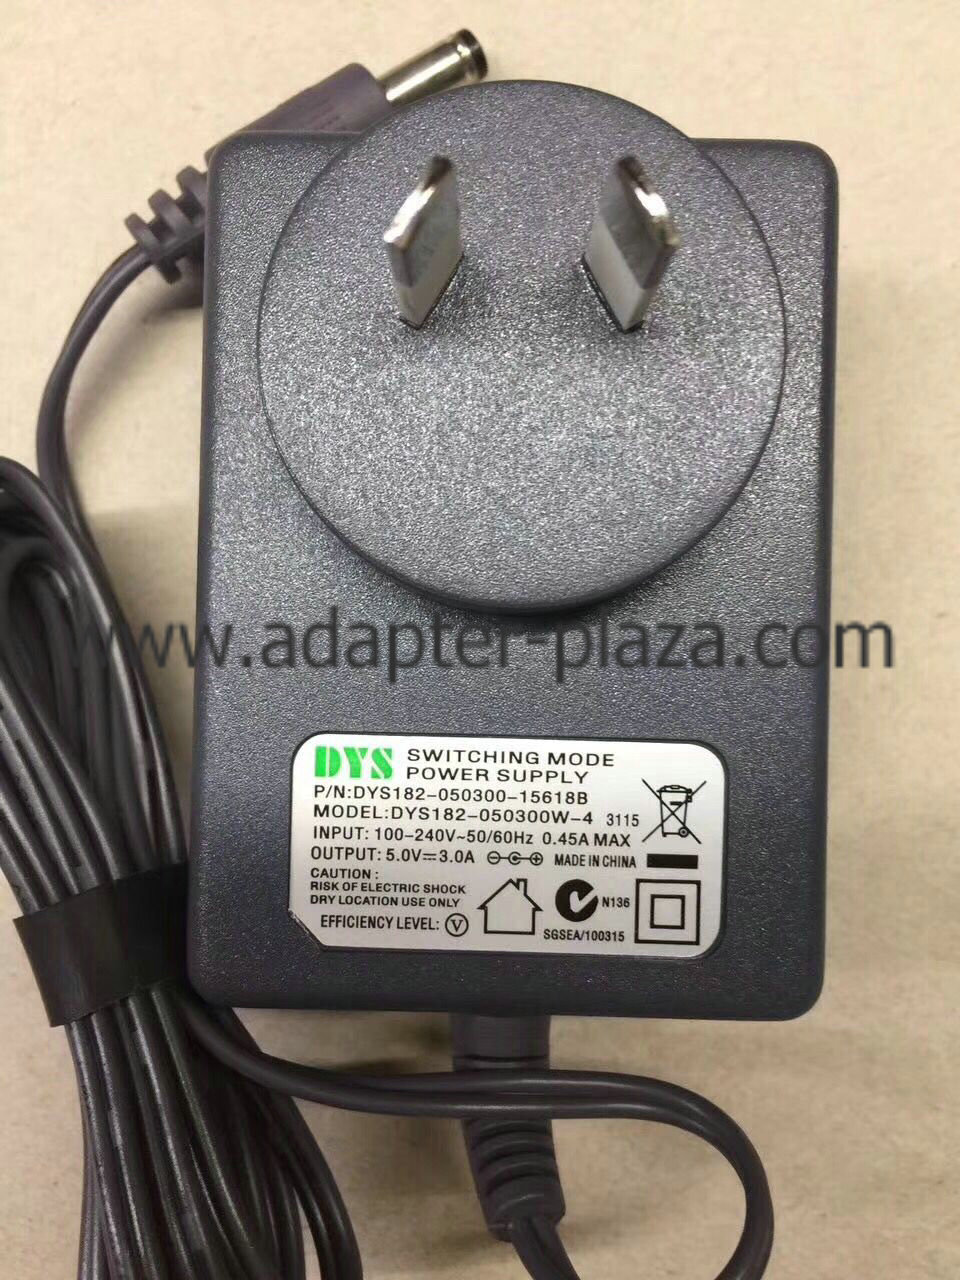 *Brand NEW* DYS DYS182-050300W-4 3115 P/N:DYS182-050300-15618B 5.0V 3.0A AC DC Adapter POWER SUPPLY - Click Image to Close